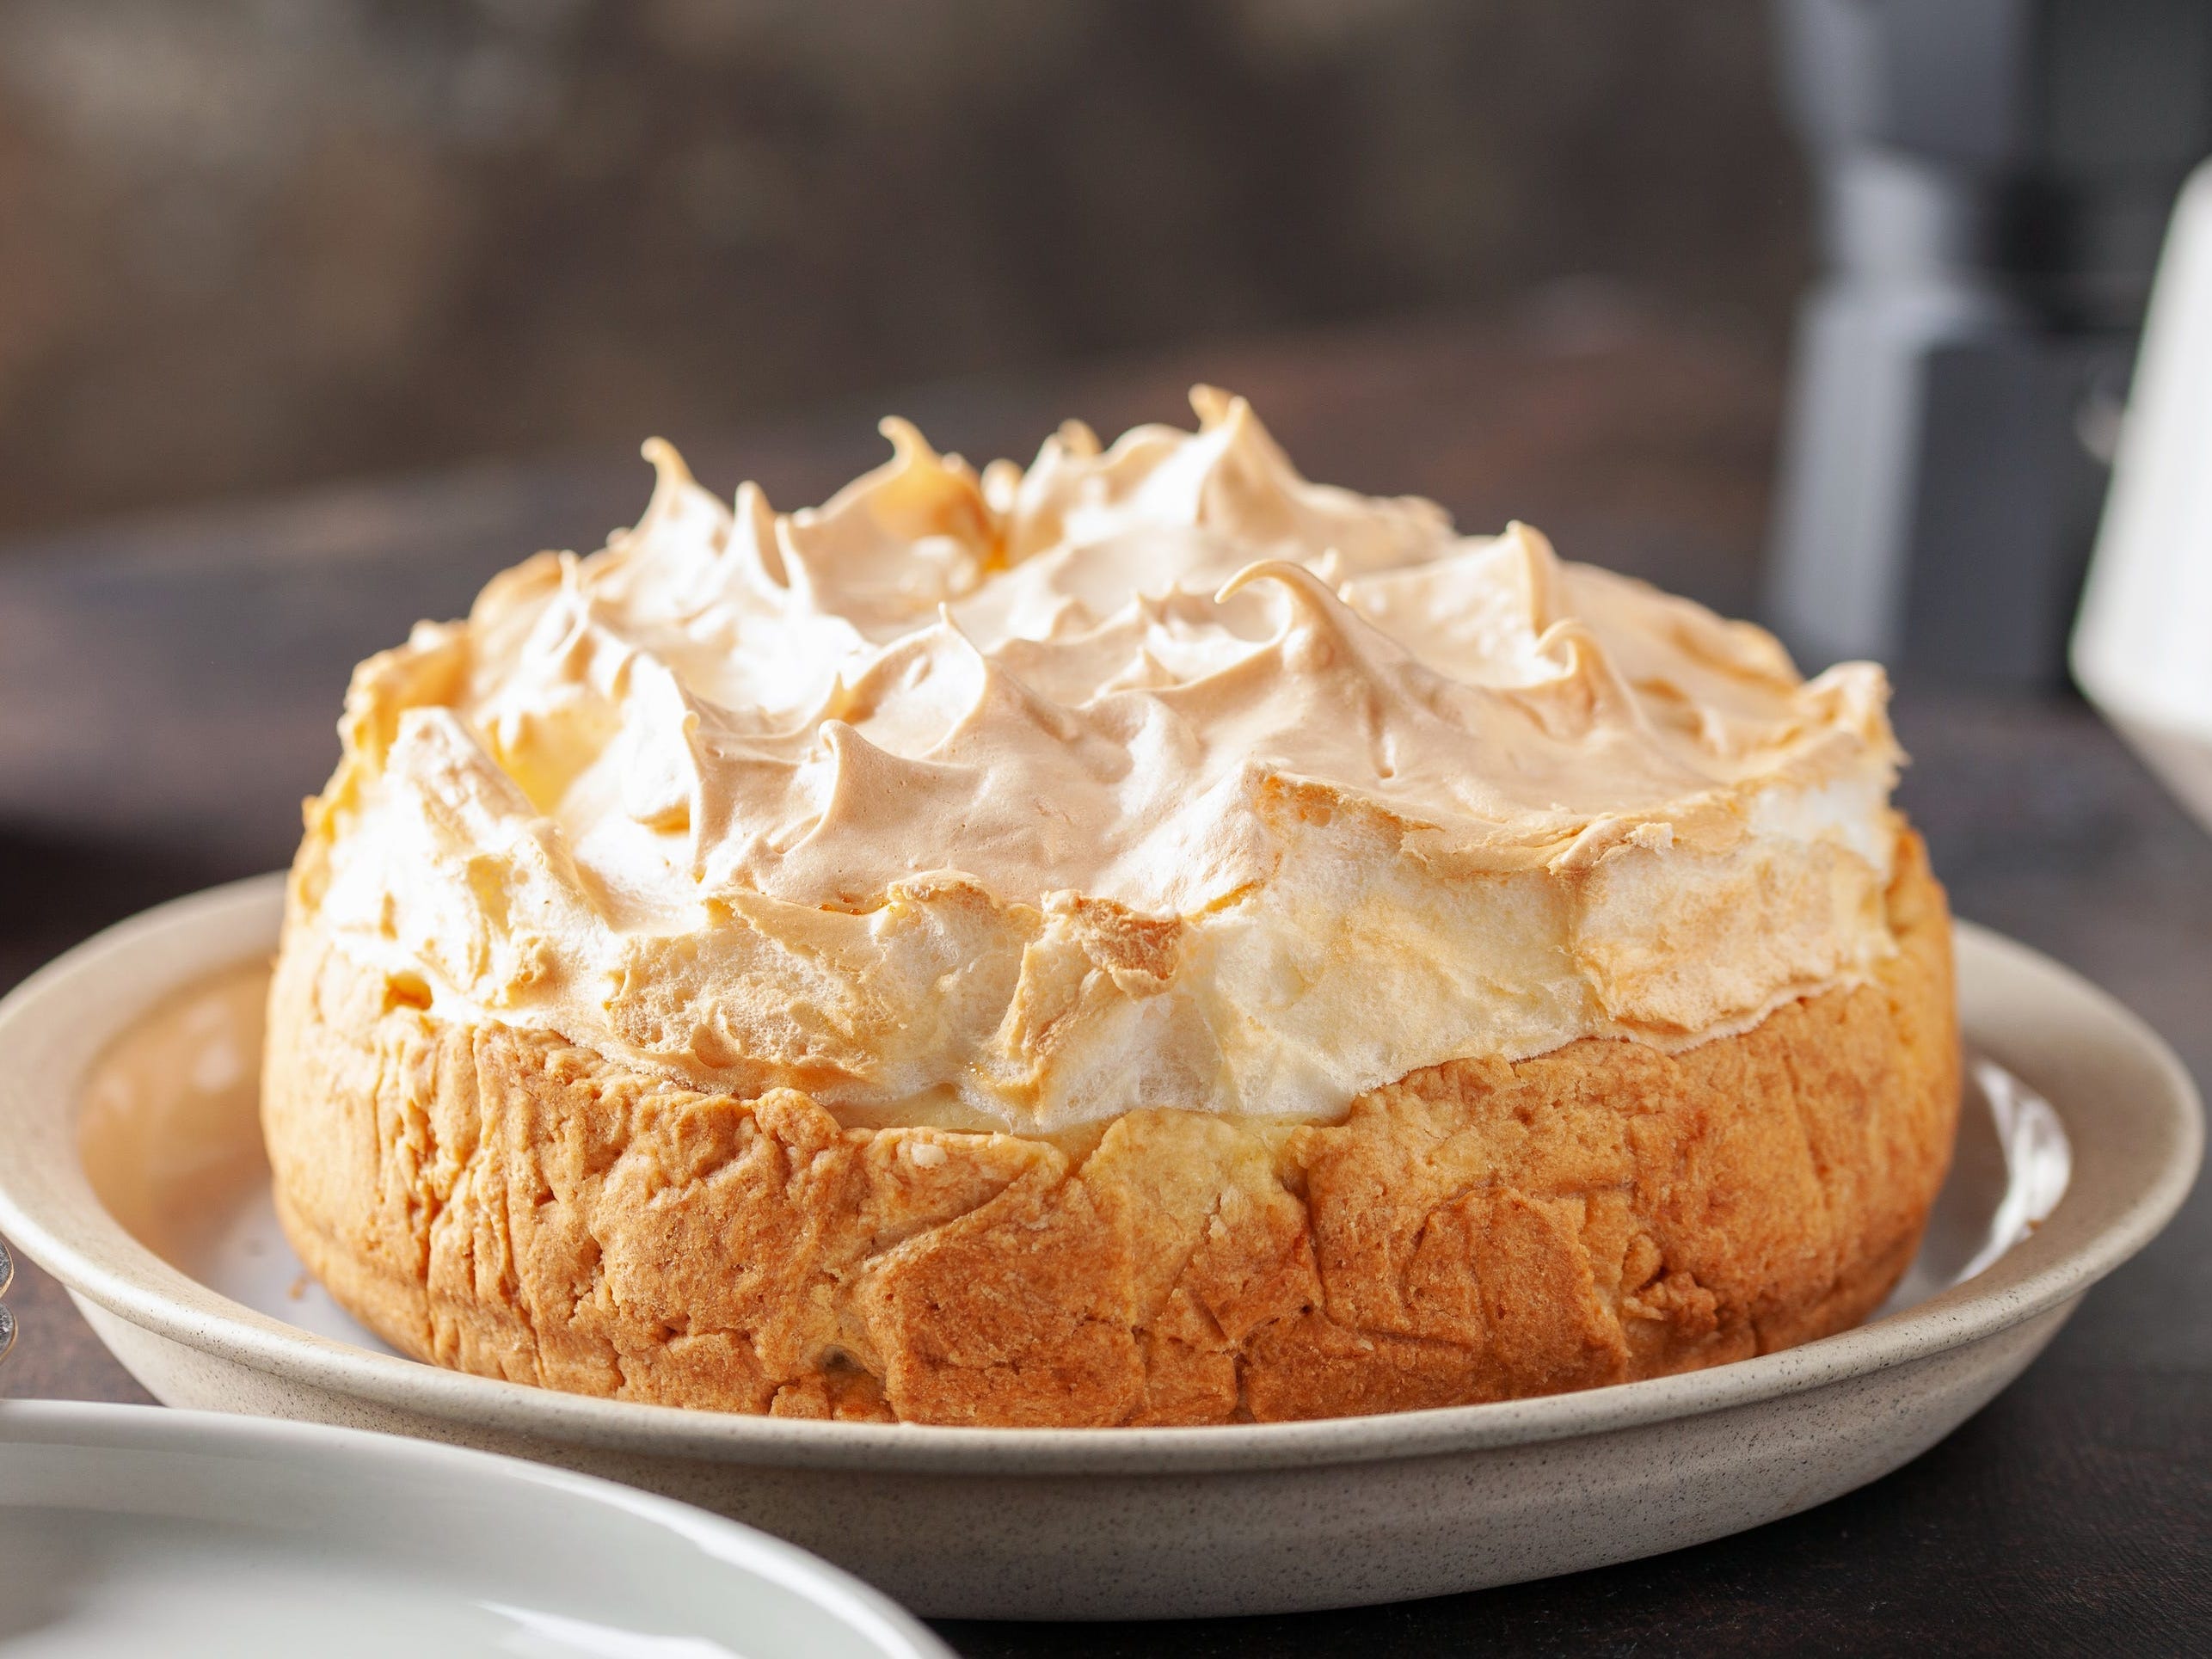 <p>The pie <a href="https://www.allrecipes.com/recipe/216797/flapper-pie/">consists of</a> a graham-cracker crust and vanilla custard, topped with a thick layer of meringue.</p><p><a href="https://thestarphoenix.com/life/bridges/kohlman-flapper-pie-a-forgotten-prairie-delicacy">According to The Star Phoenix</a>, the turnover dates back to the 1920s and was served in cafés in small Canadian Prairie towns. </p>